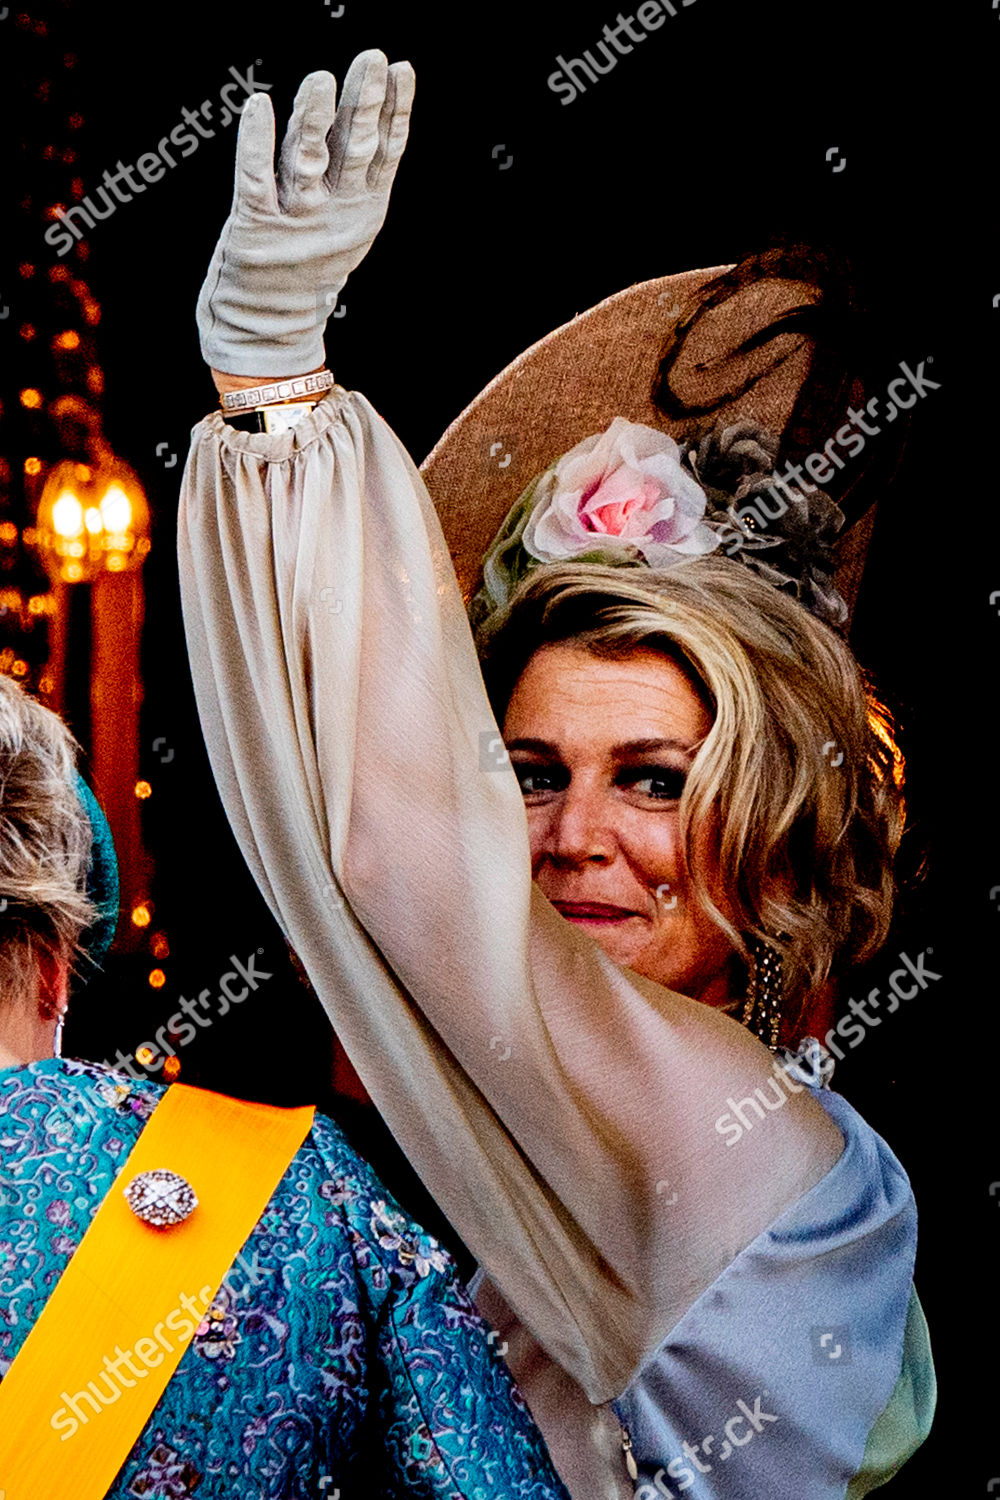 opening-of-the-parliamentary-season-the-hague-the-netherlands-shutterstock-editorial-9885898ak.jpg